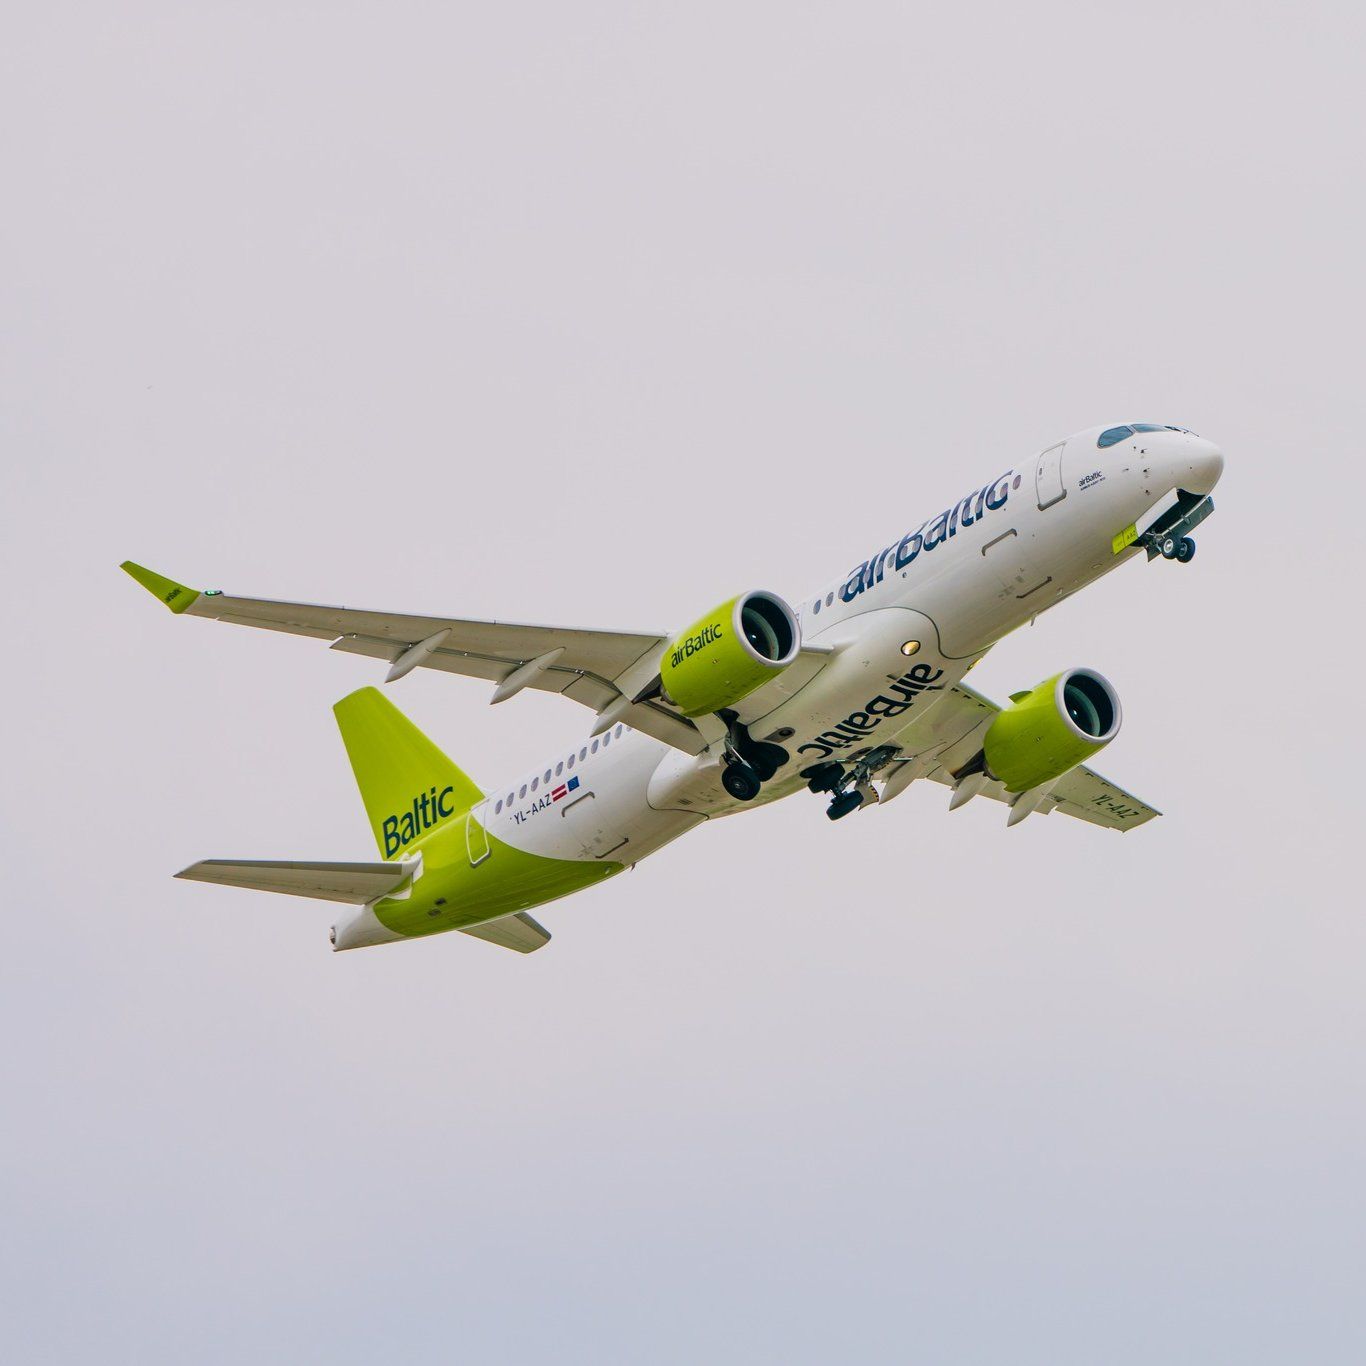 airBaltic Airbus A220-300 taking off.